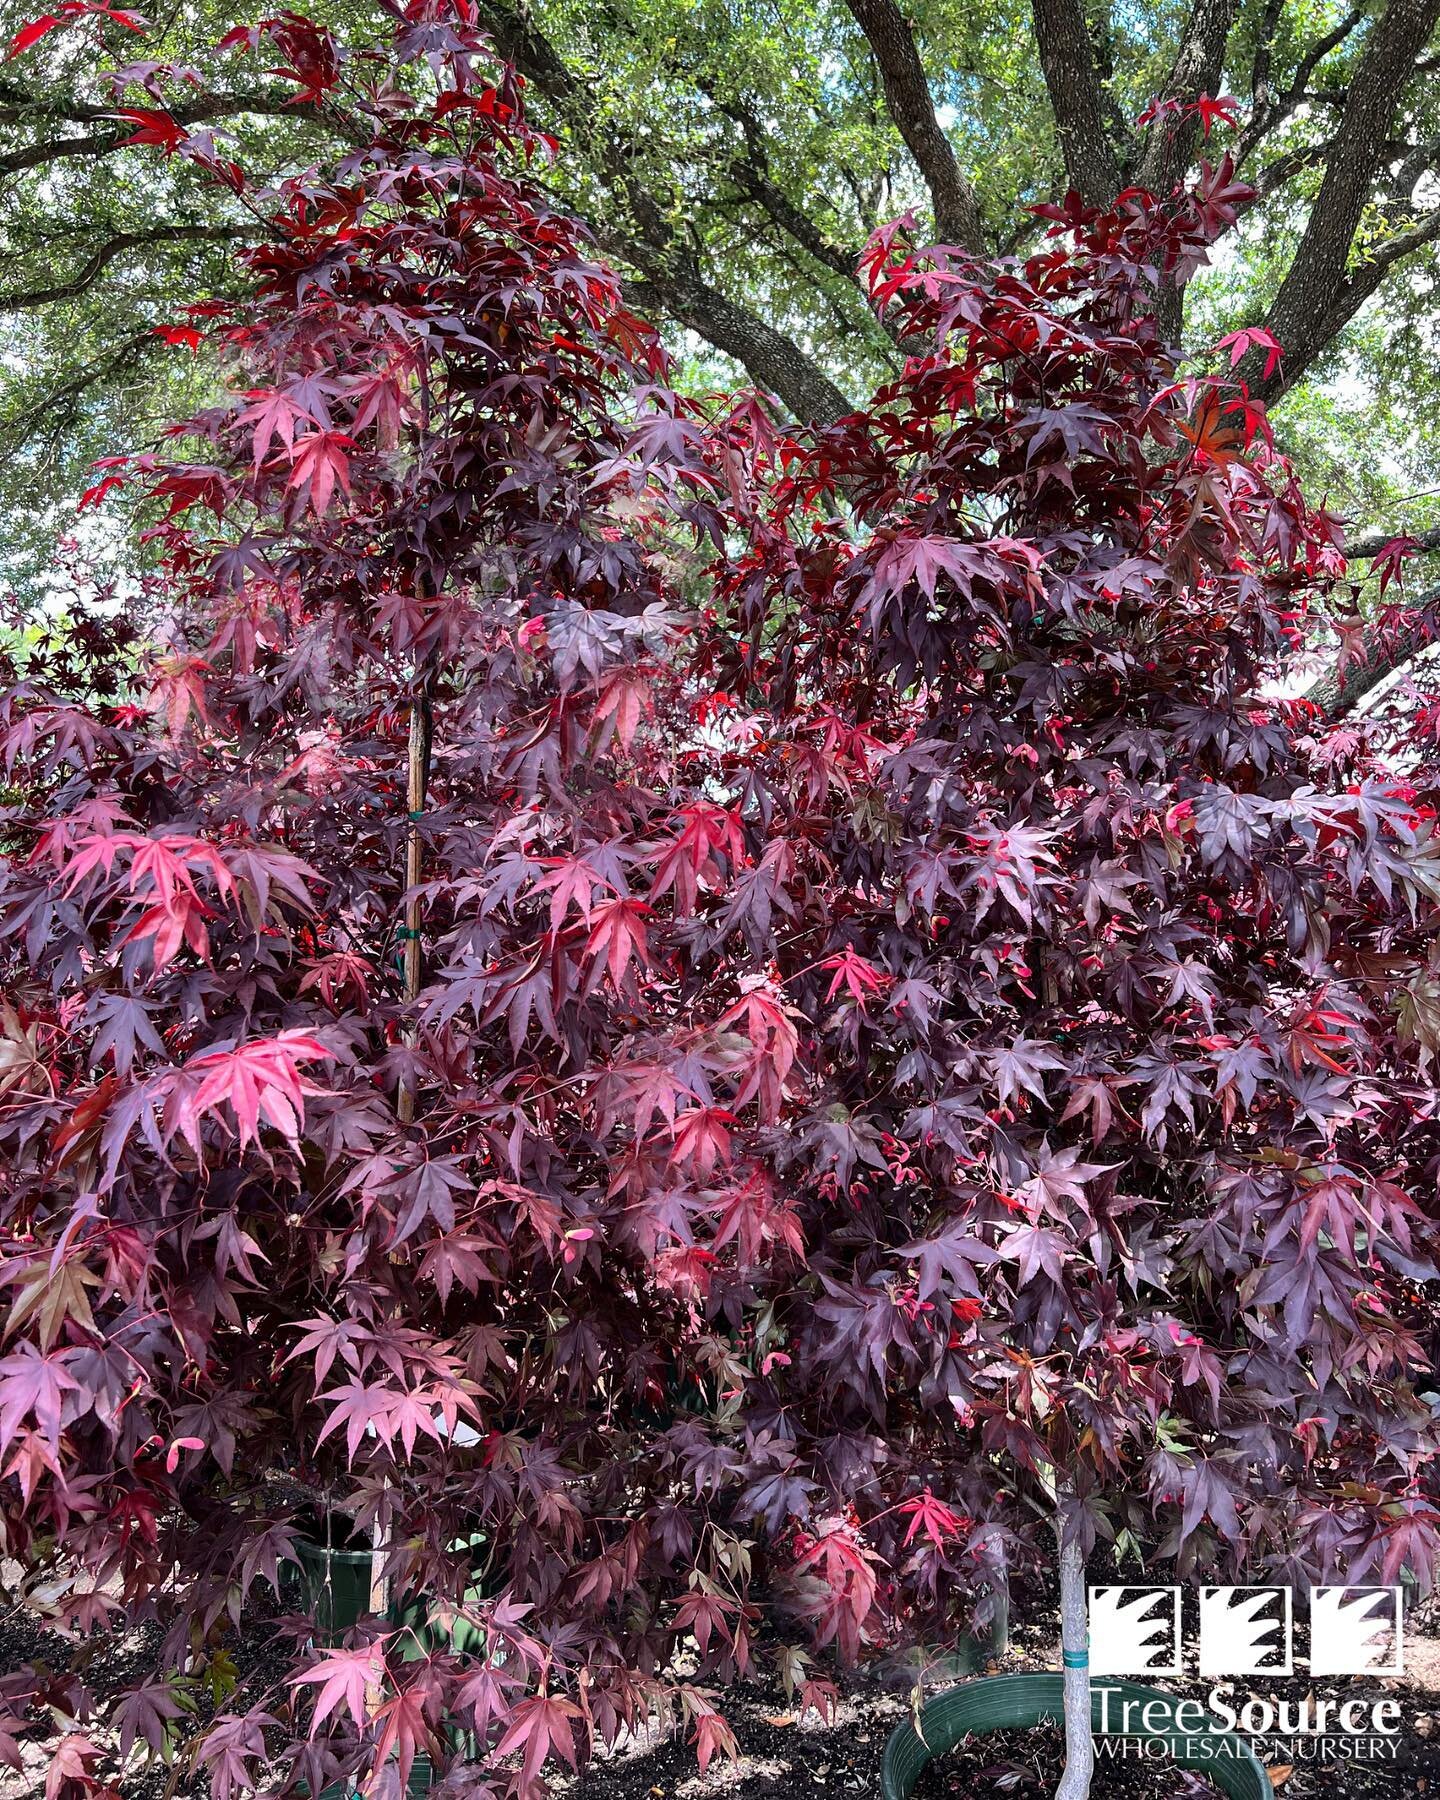 Japanese Maple&rsquo;s Available!
 
Bloodgood and Emperor 1 ✨ 

_________

#treesourcewholesalenursery
#thetreesourcedifference
#spring2023
#nurserylife
#houstontx
#horticulture
#excellentservice
#exquisitequality
#extensiveassortment
#keepingitgreen